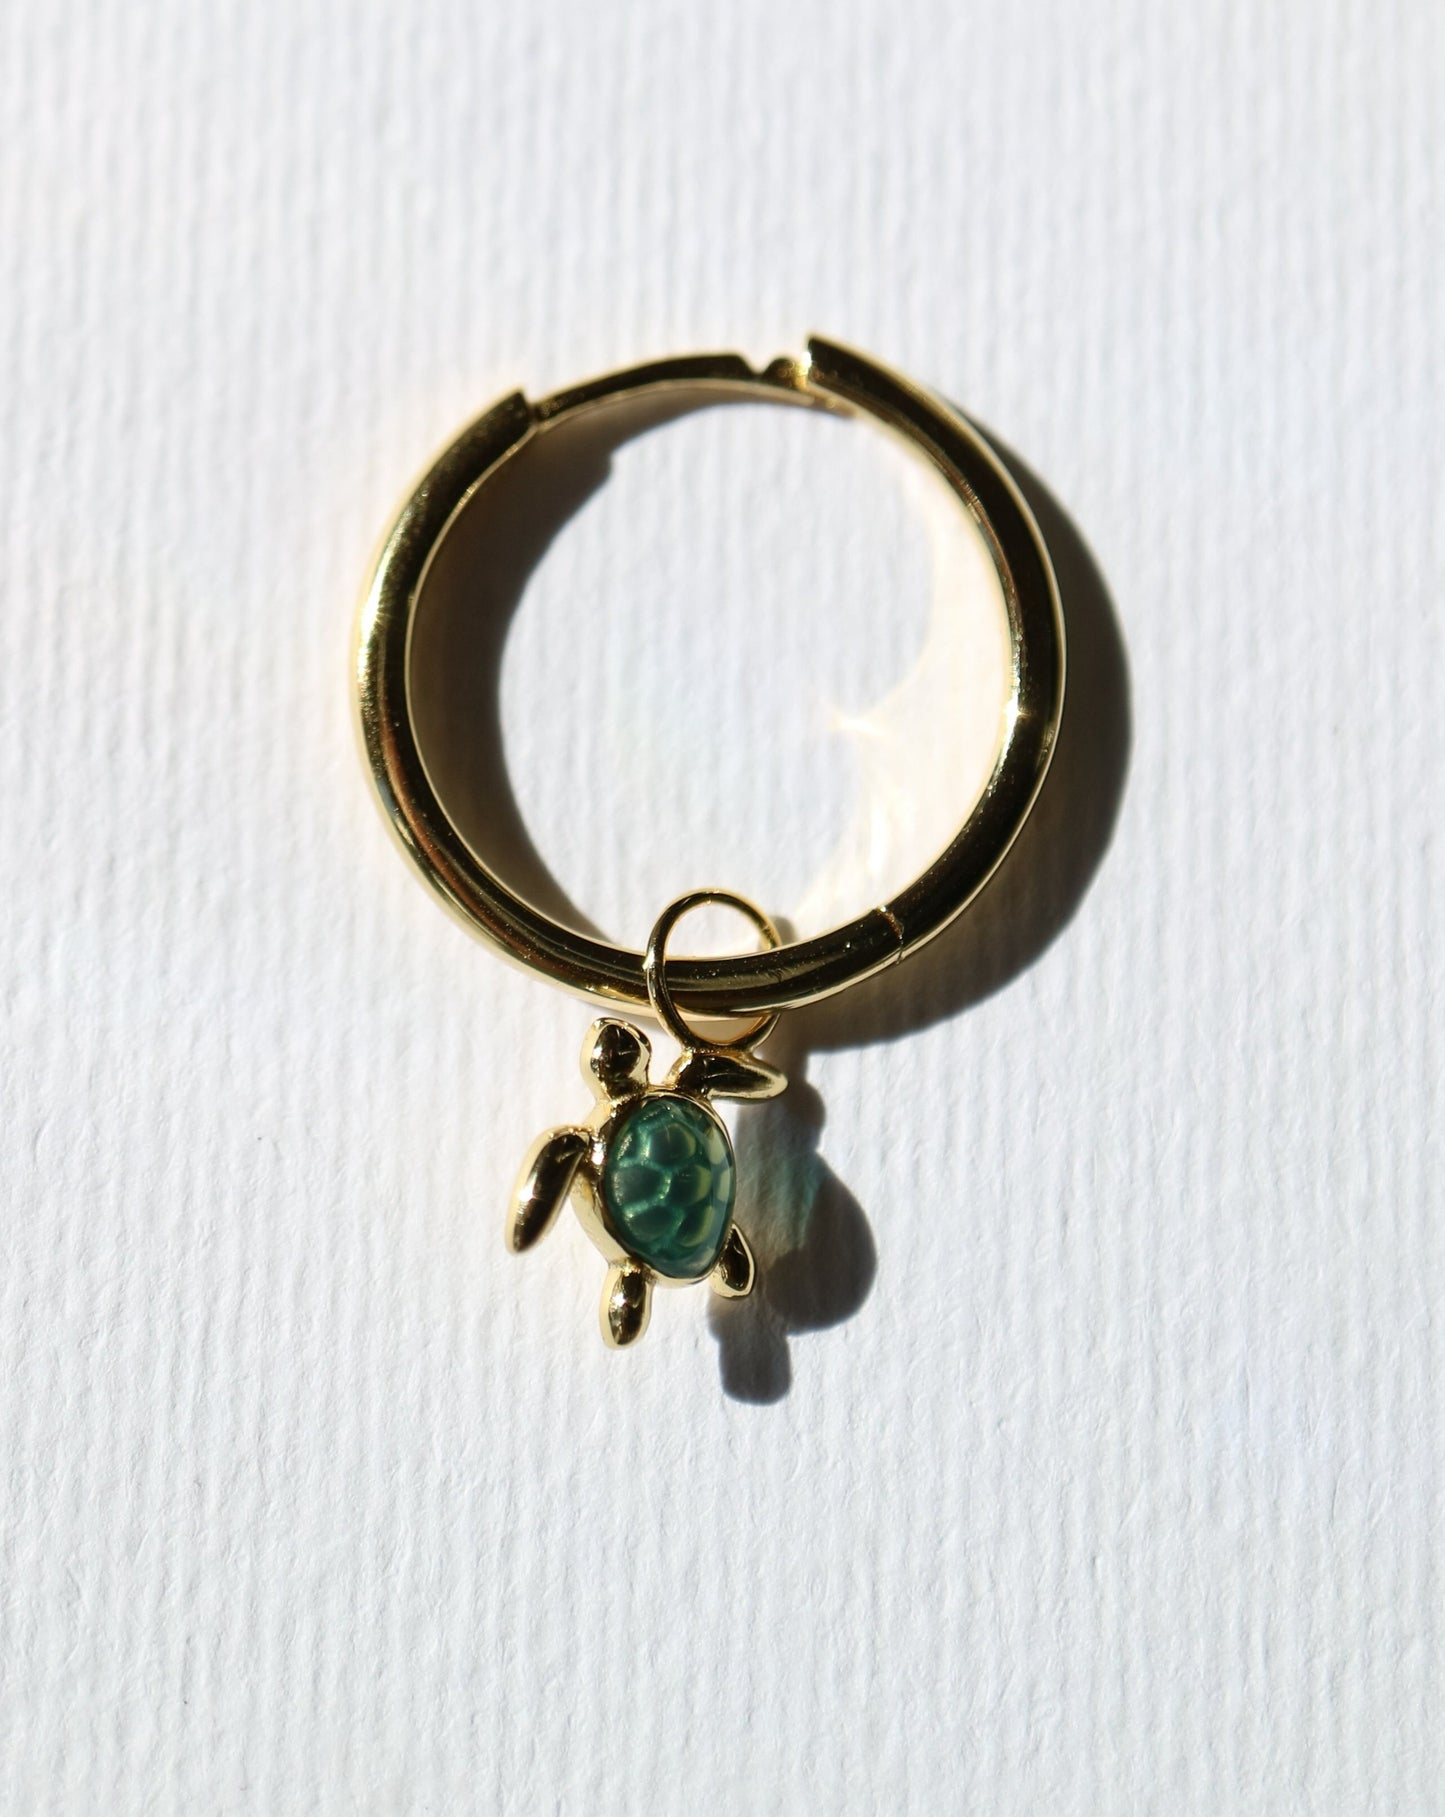 Turtle charm for jewelry